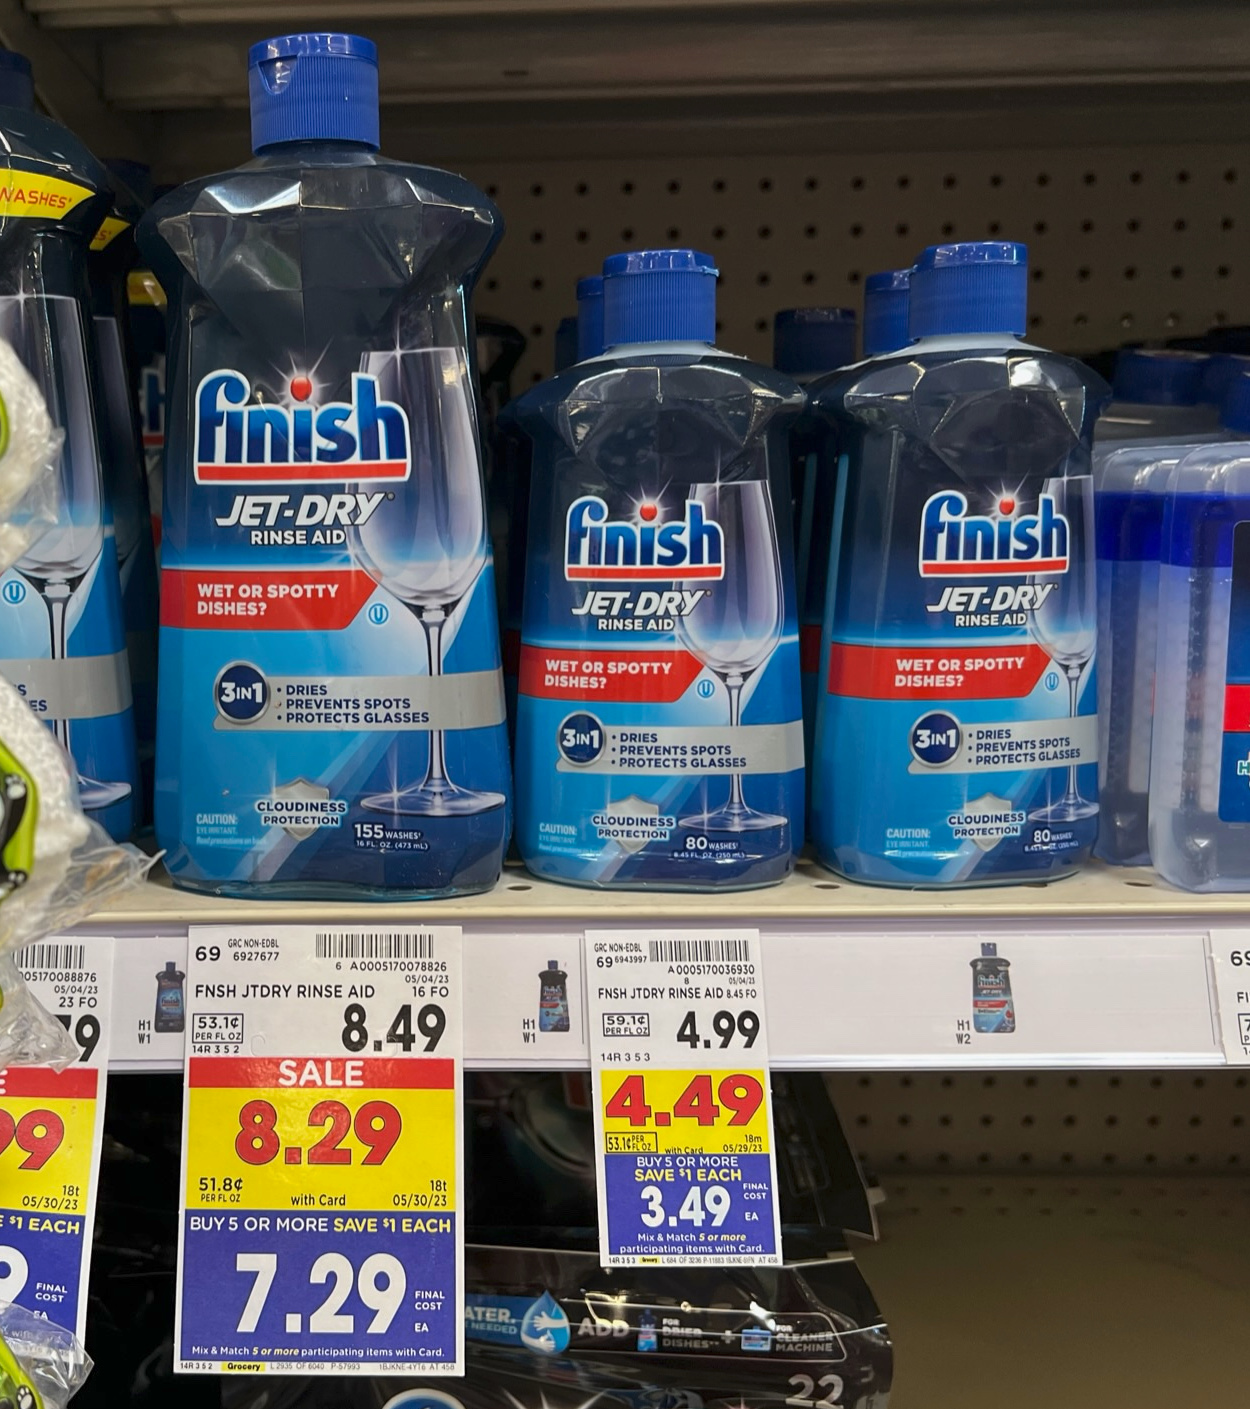 Finish Jet Dry As Low As 99¢ At Kroger - iHeartKroger